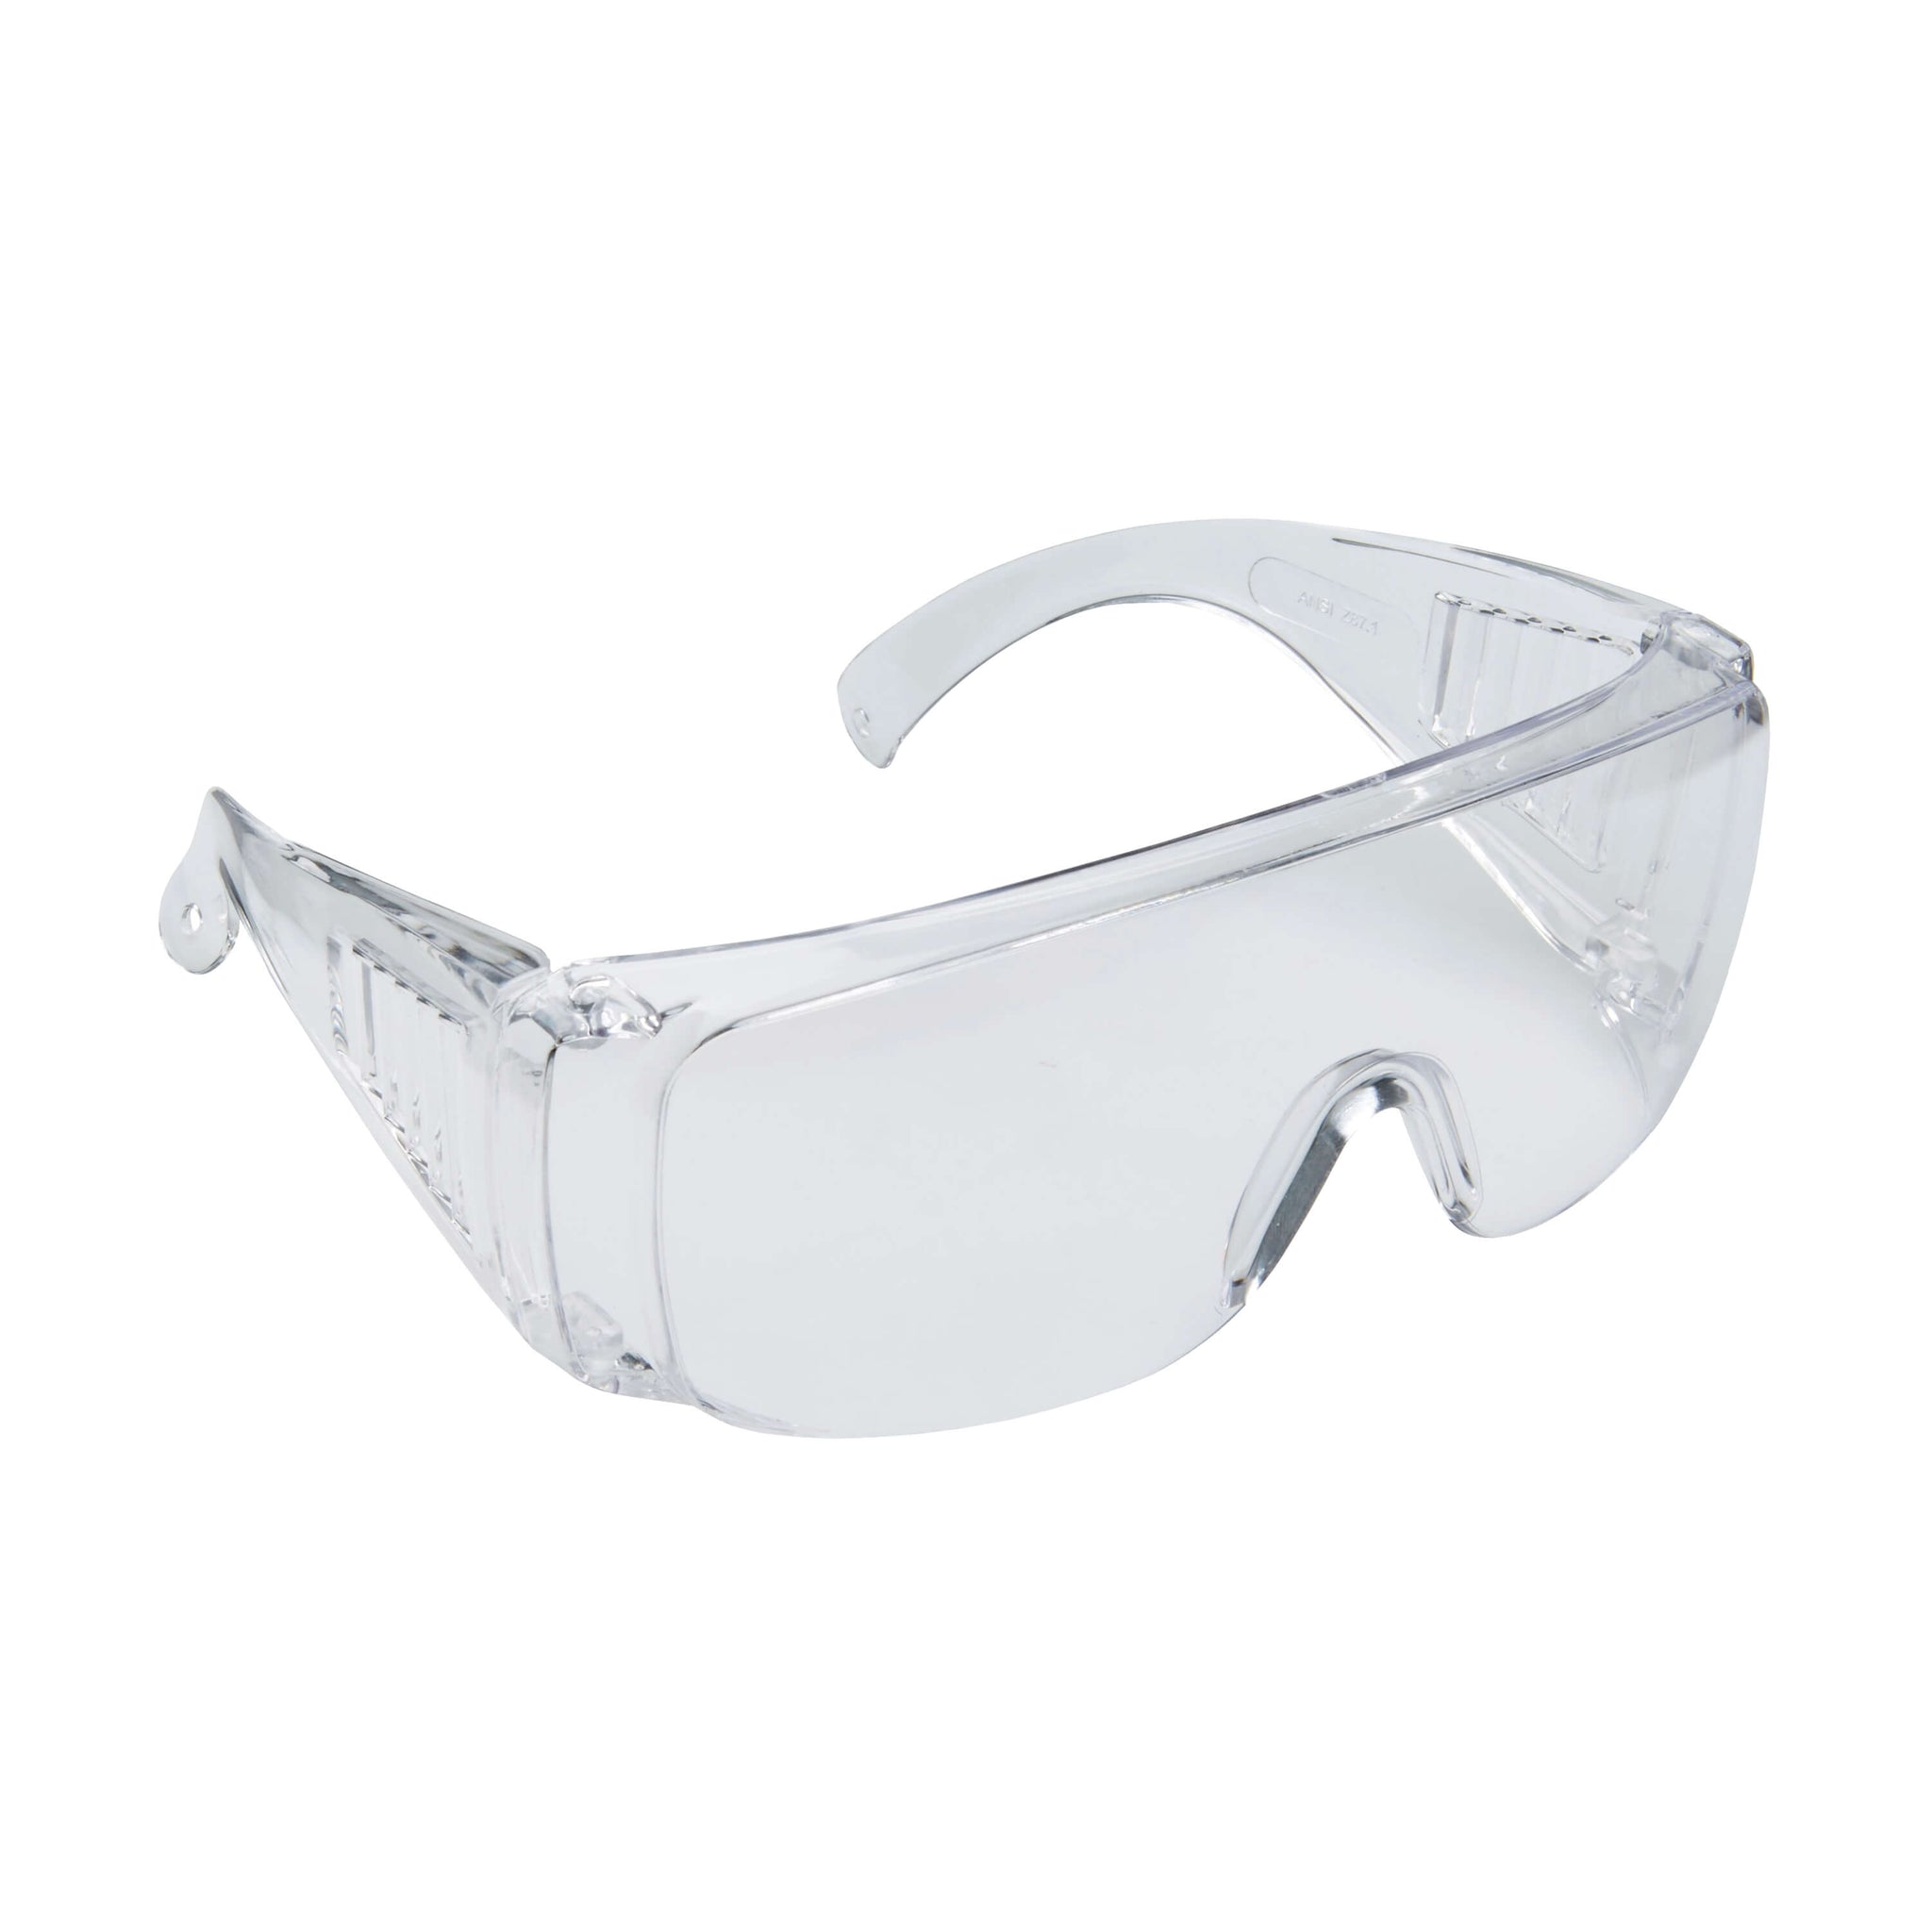 Safety Glasses- Fit Over Spectacles, Single Use